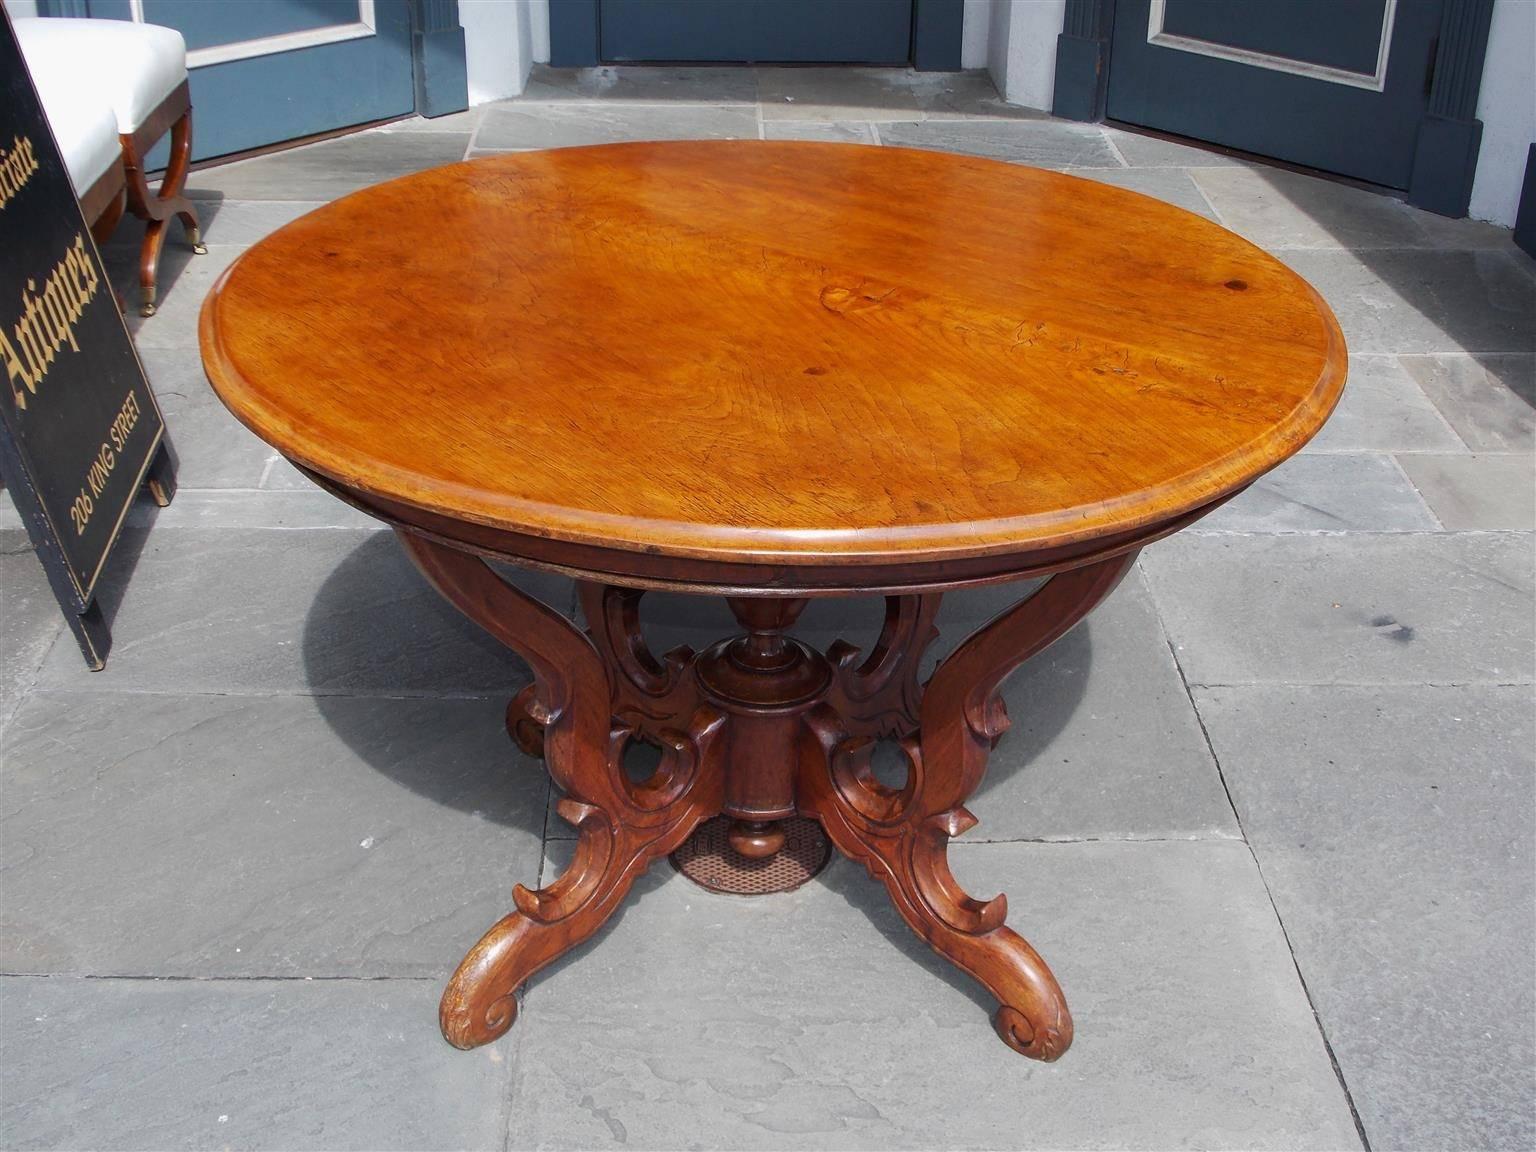 French walnut center table with one board top, carved banded skirt, centered urn, and resting on four acanthus scrolled legs. Early 19th century. Table skirt height is 26.5